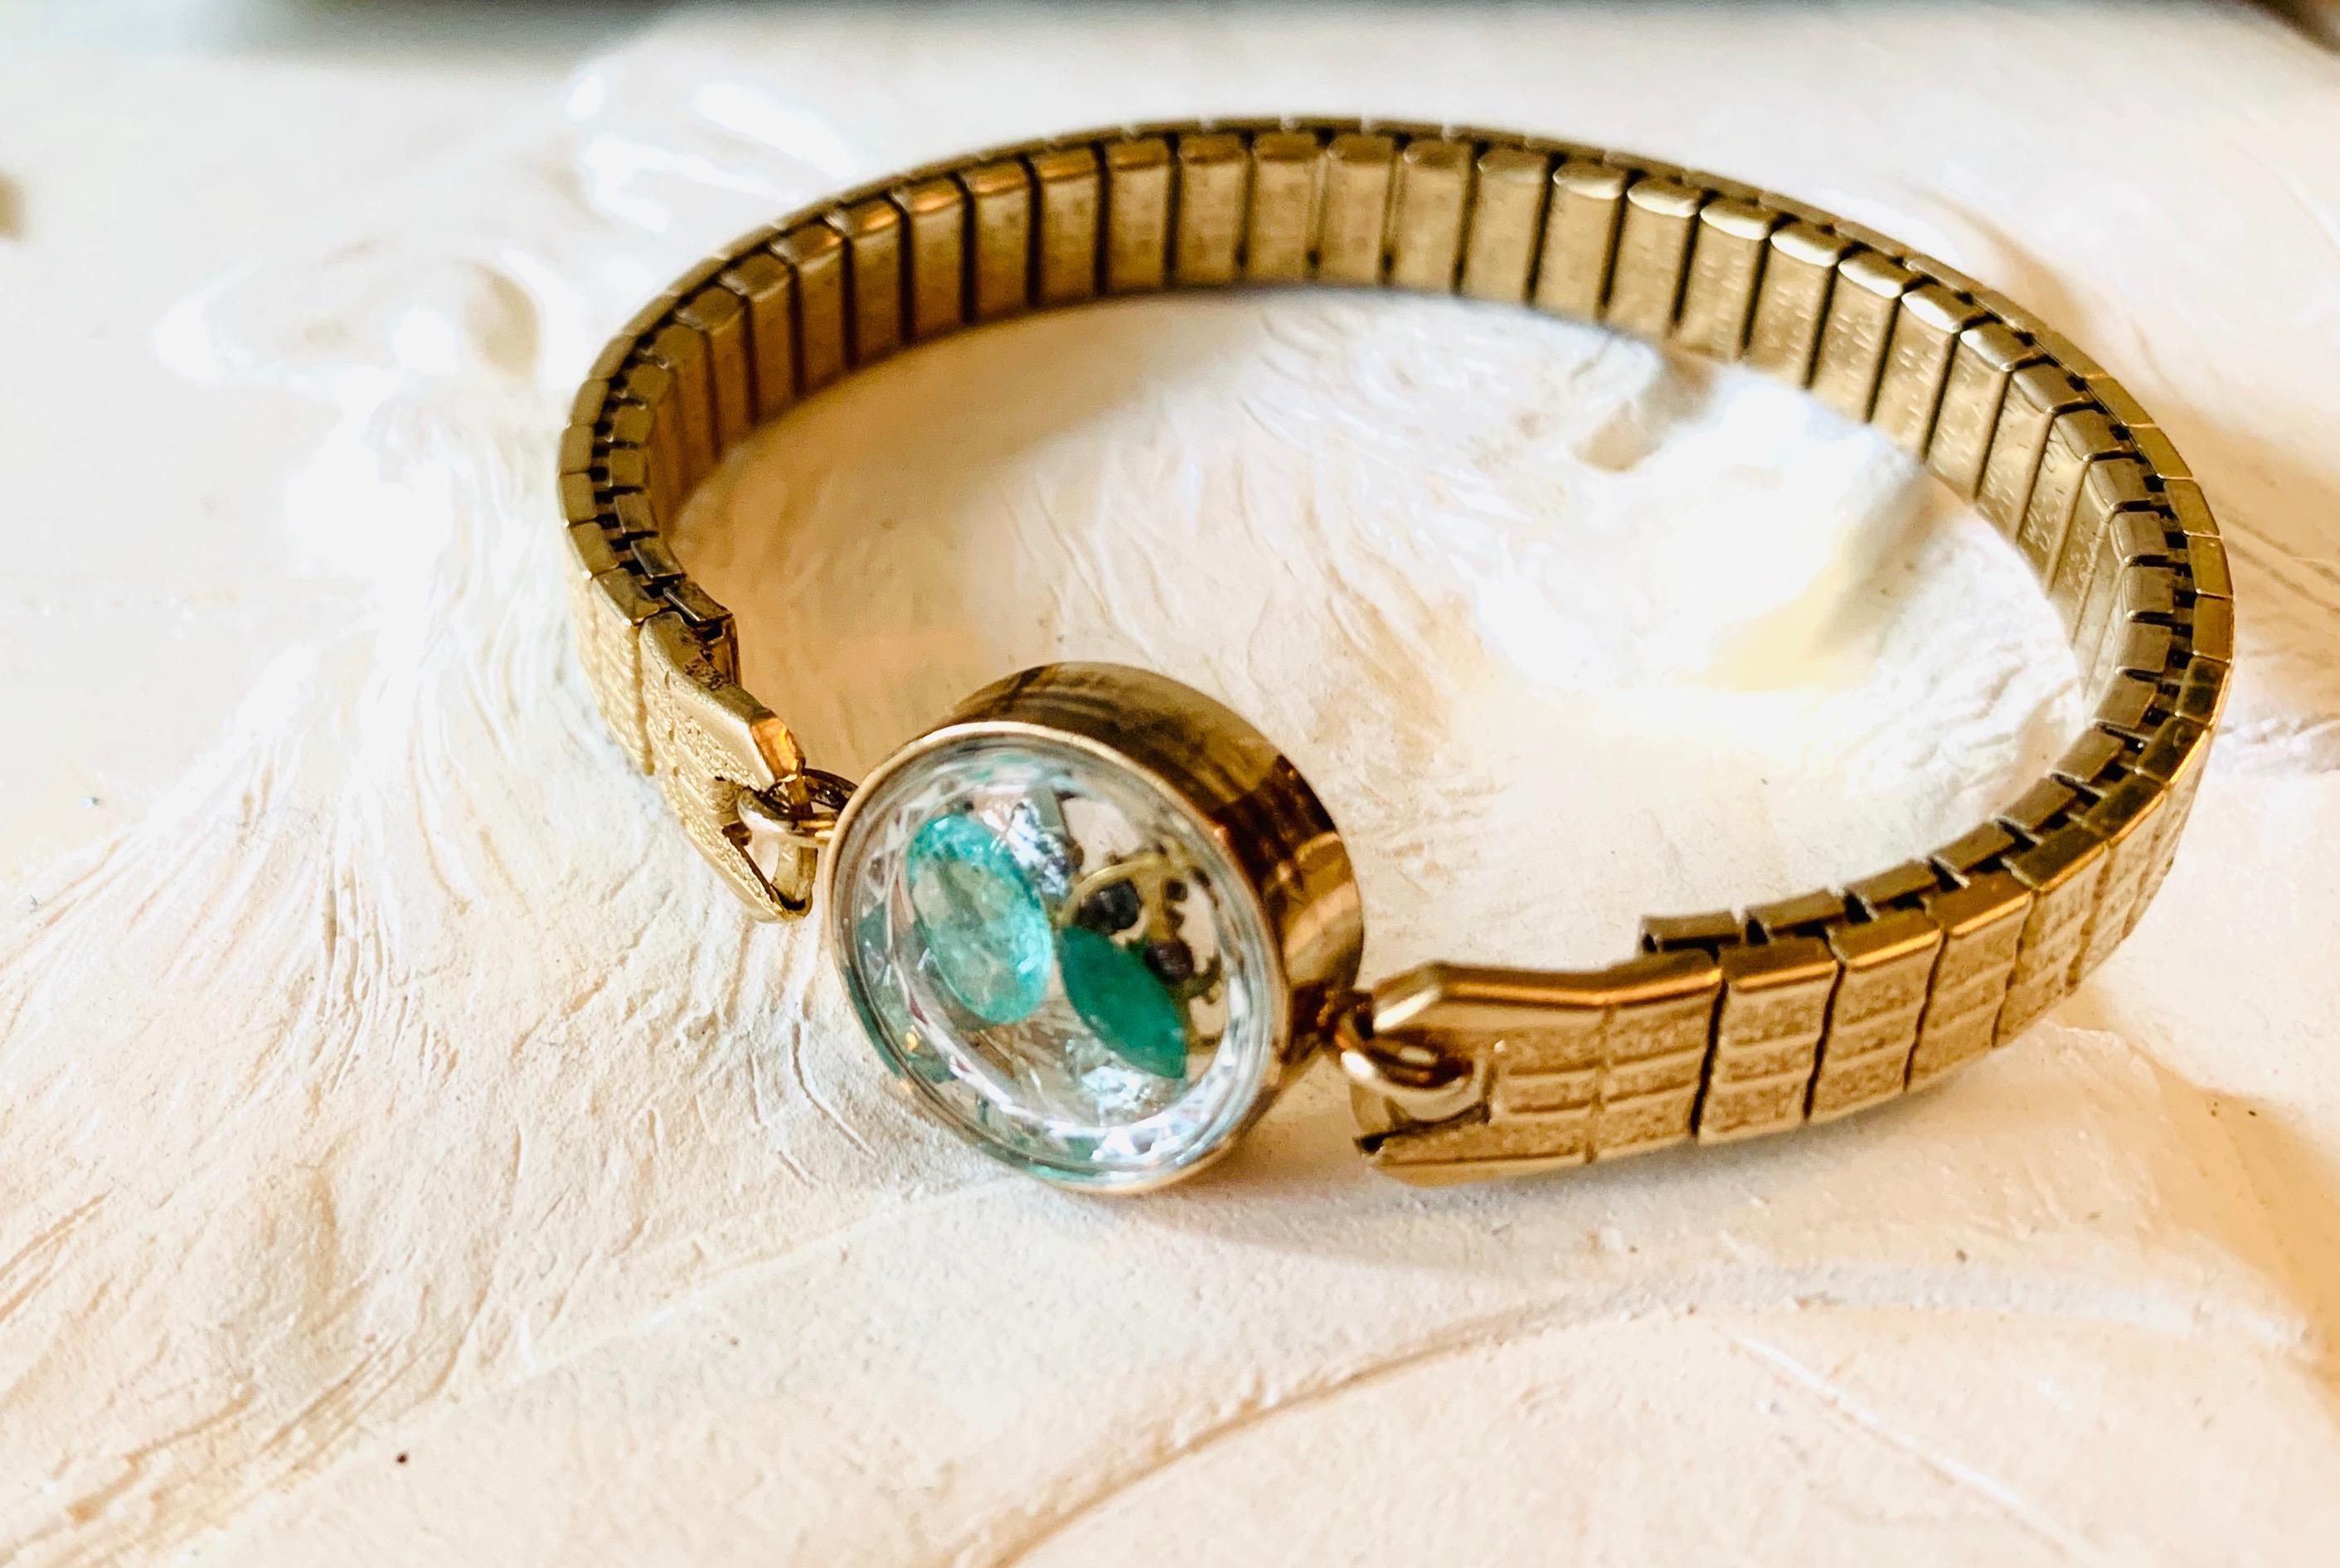 The Stardust band is a non-functioning antique watch  a symbol, a talisman,
to hold the intention of staying present, neither dwelling in
the past nor looking toward the future. The fairydust inside this particular band is 2 carats of Vintage